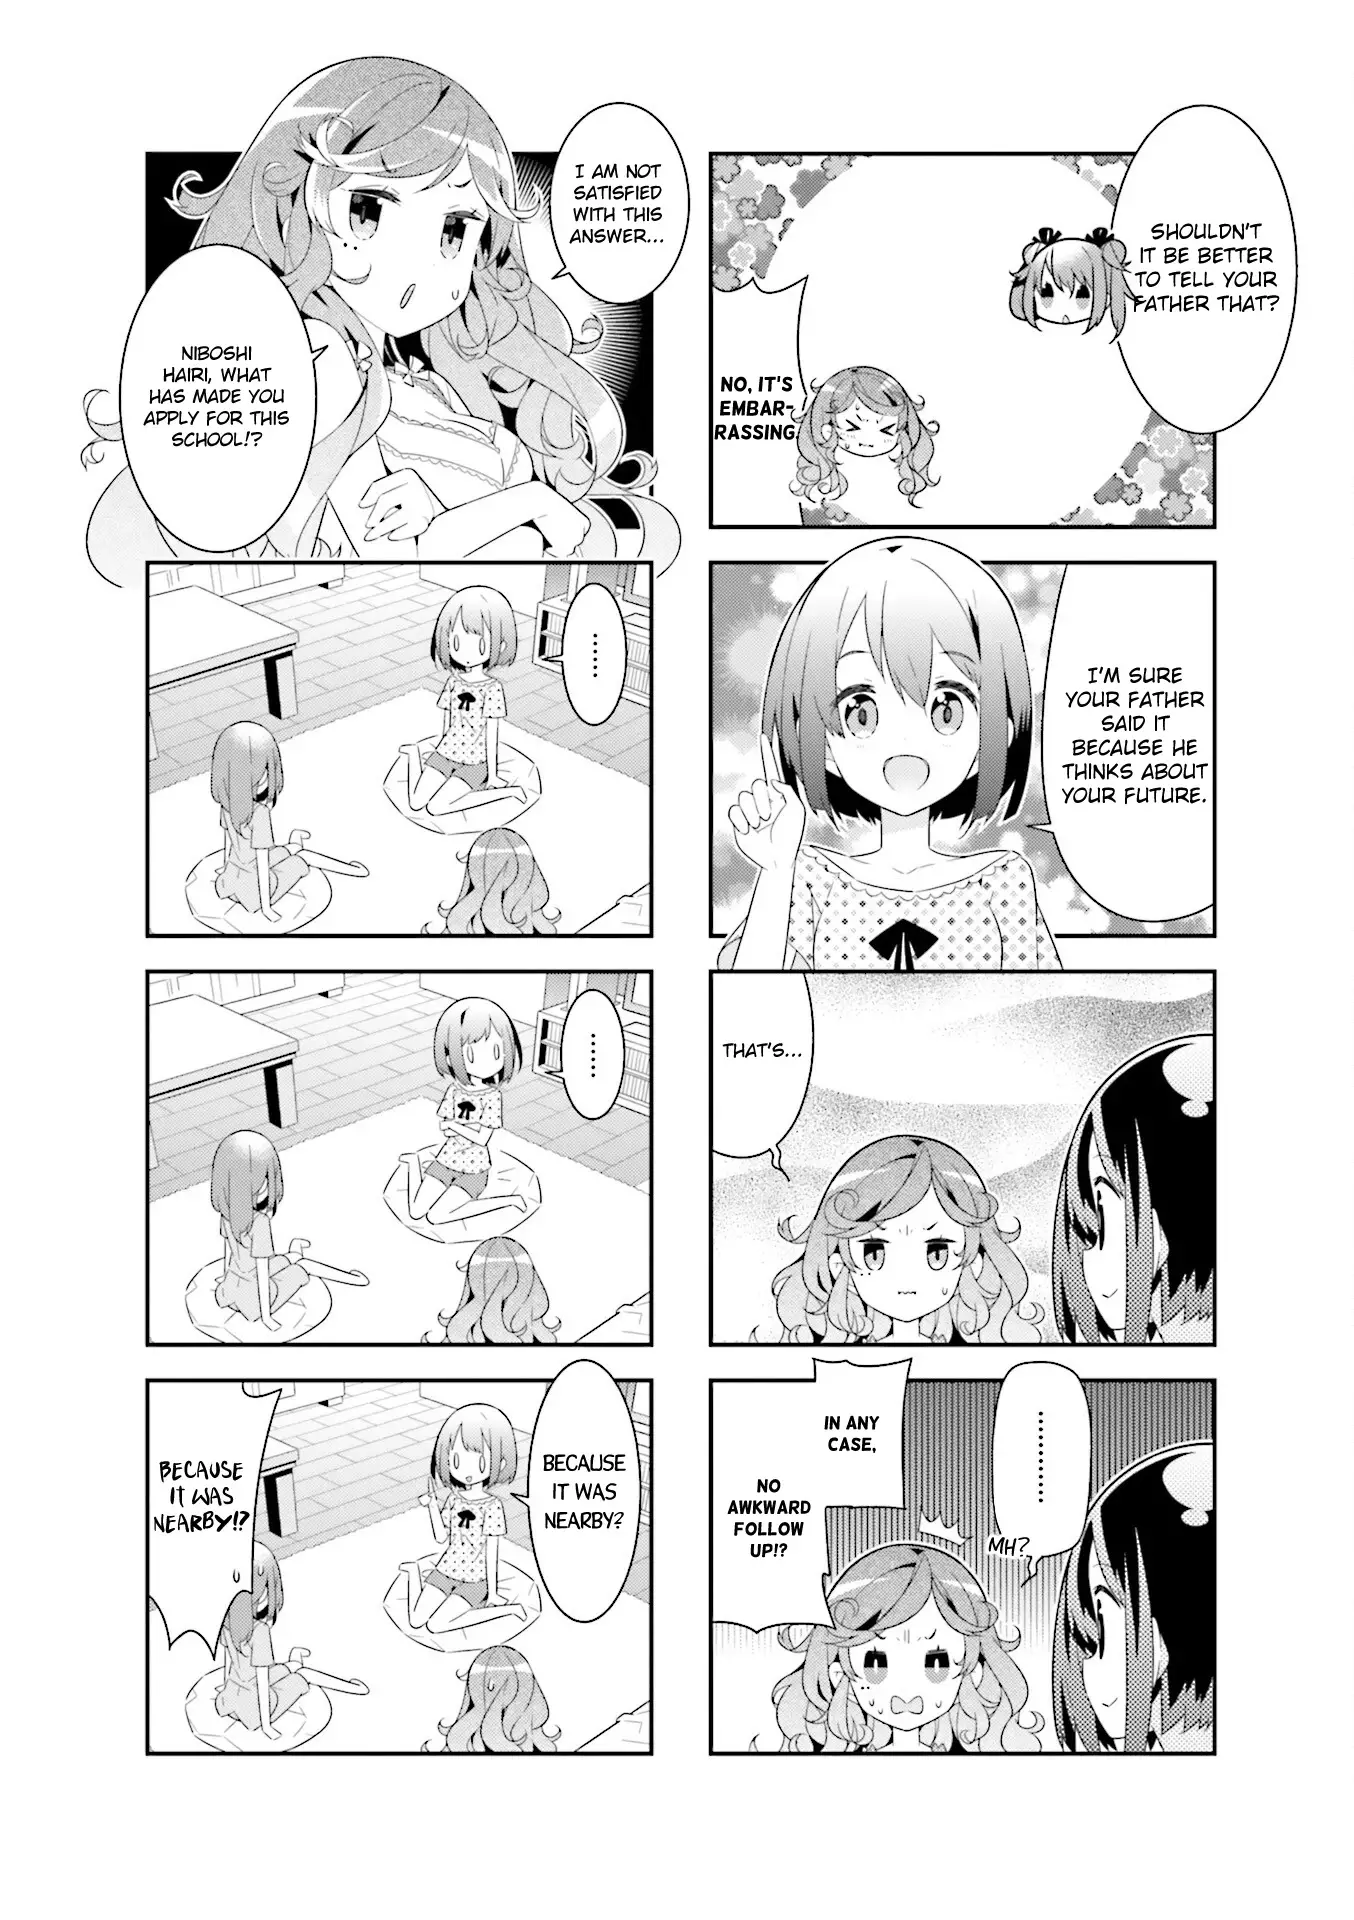 The Life After Retirement Of Magical Girls - 15 page 4-5c8e9a93